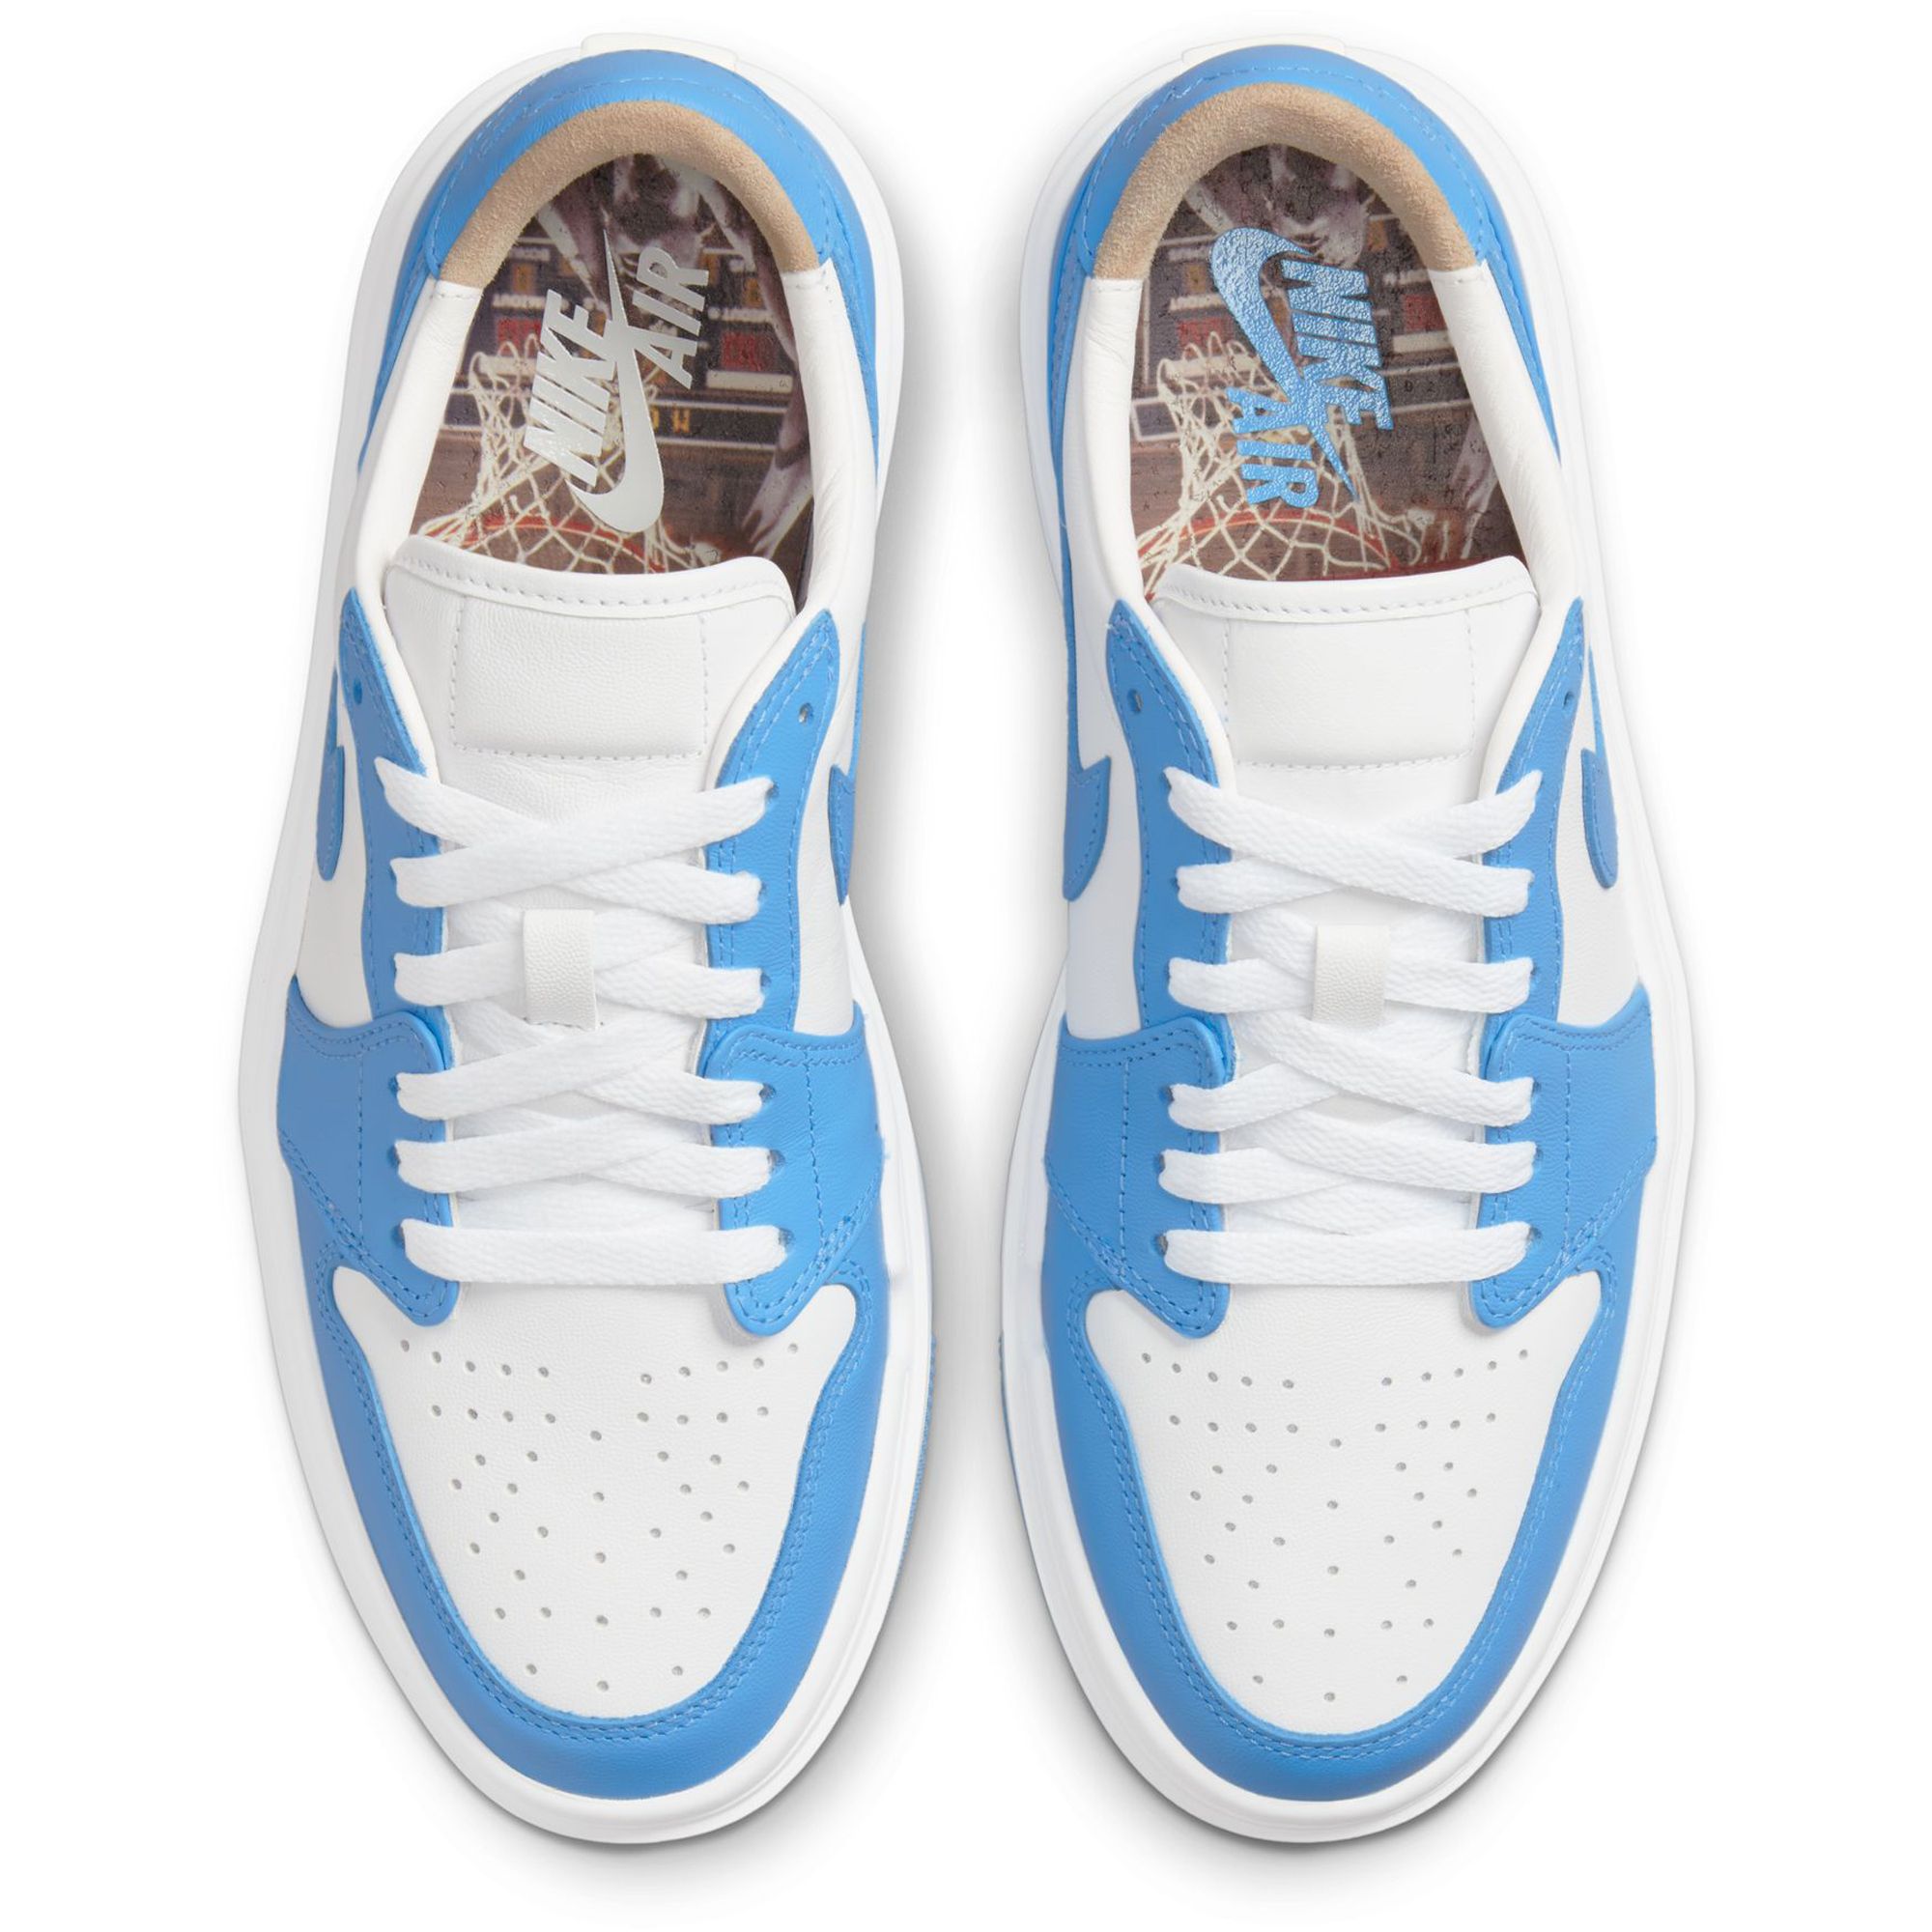 Official Photos of the Air Jordan max 1 Elevate Low University Blue